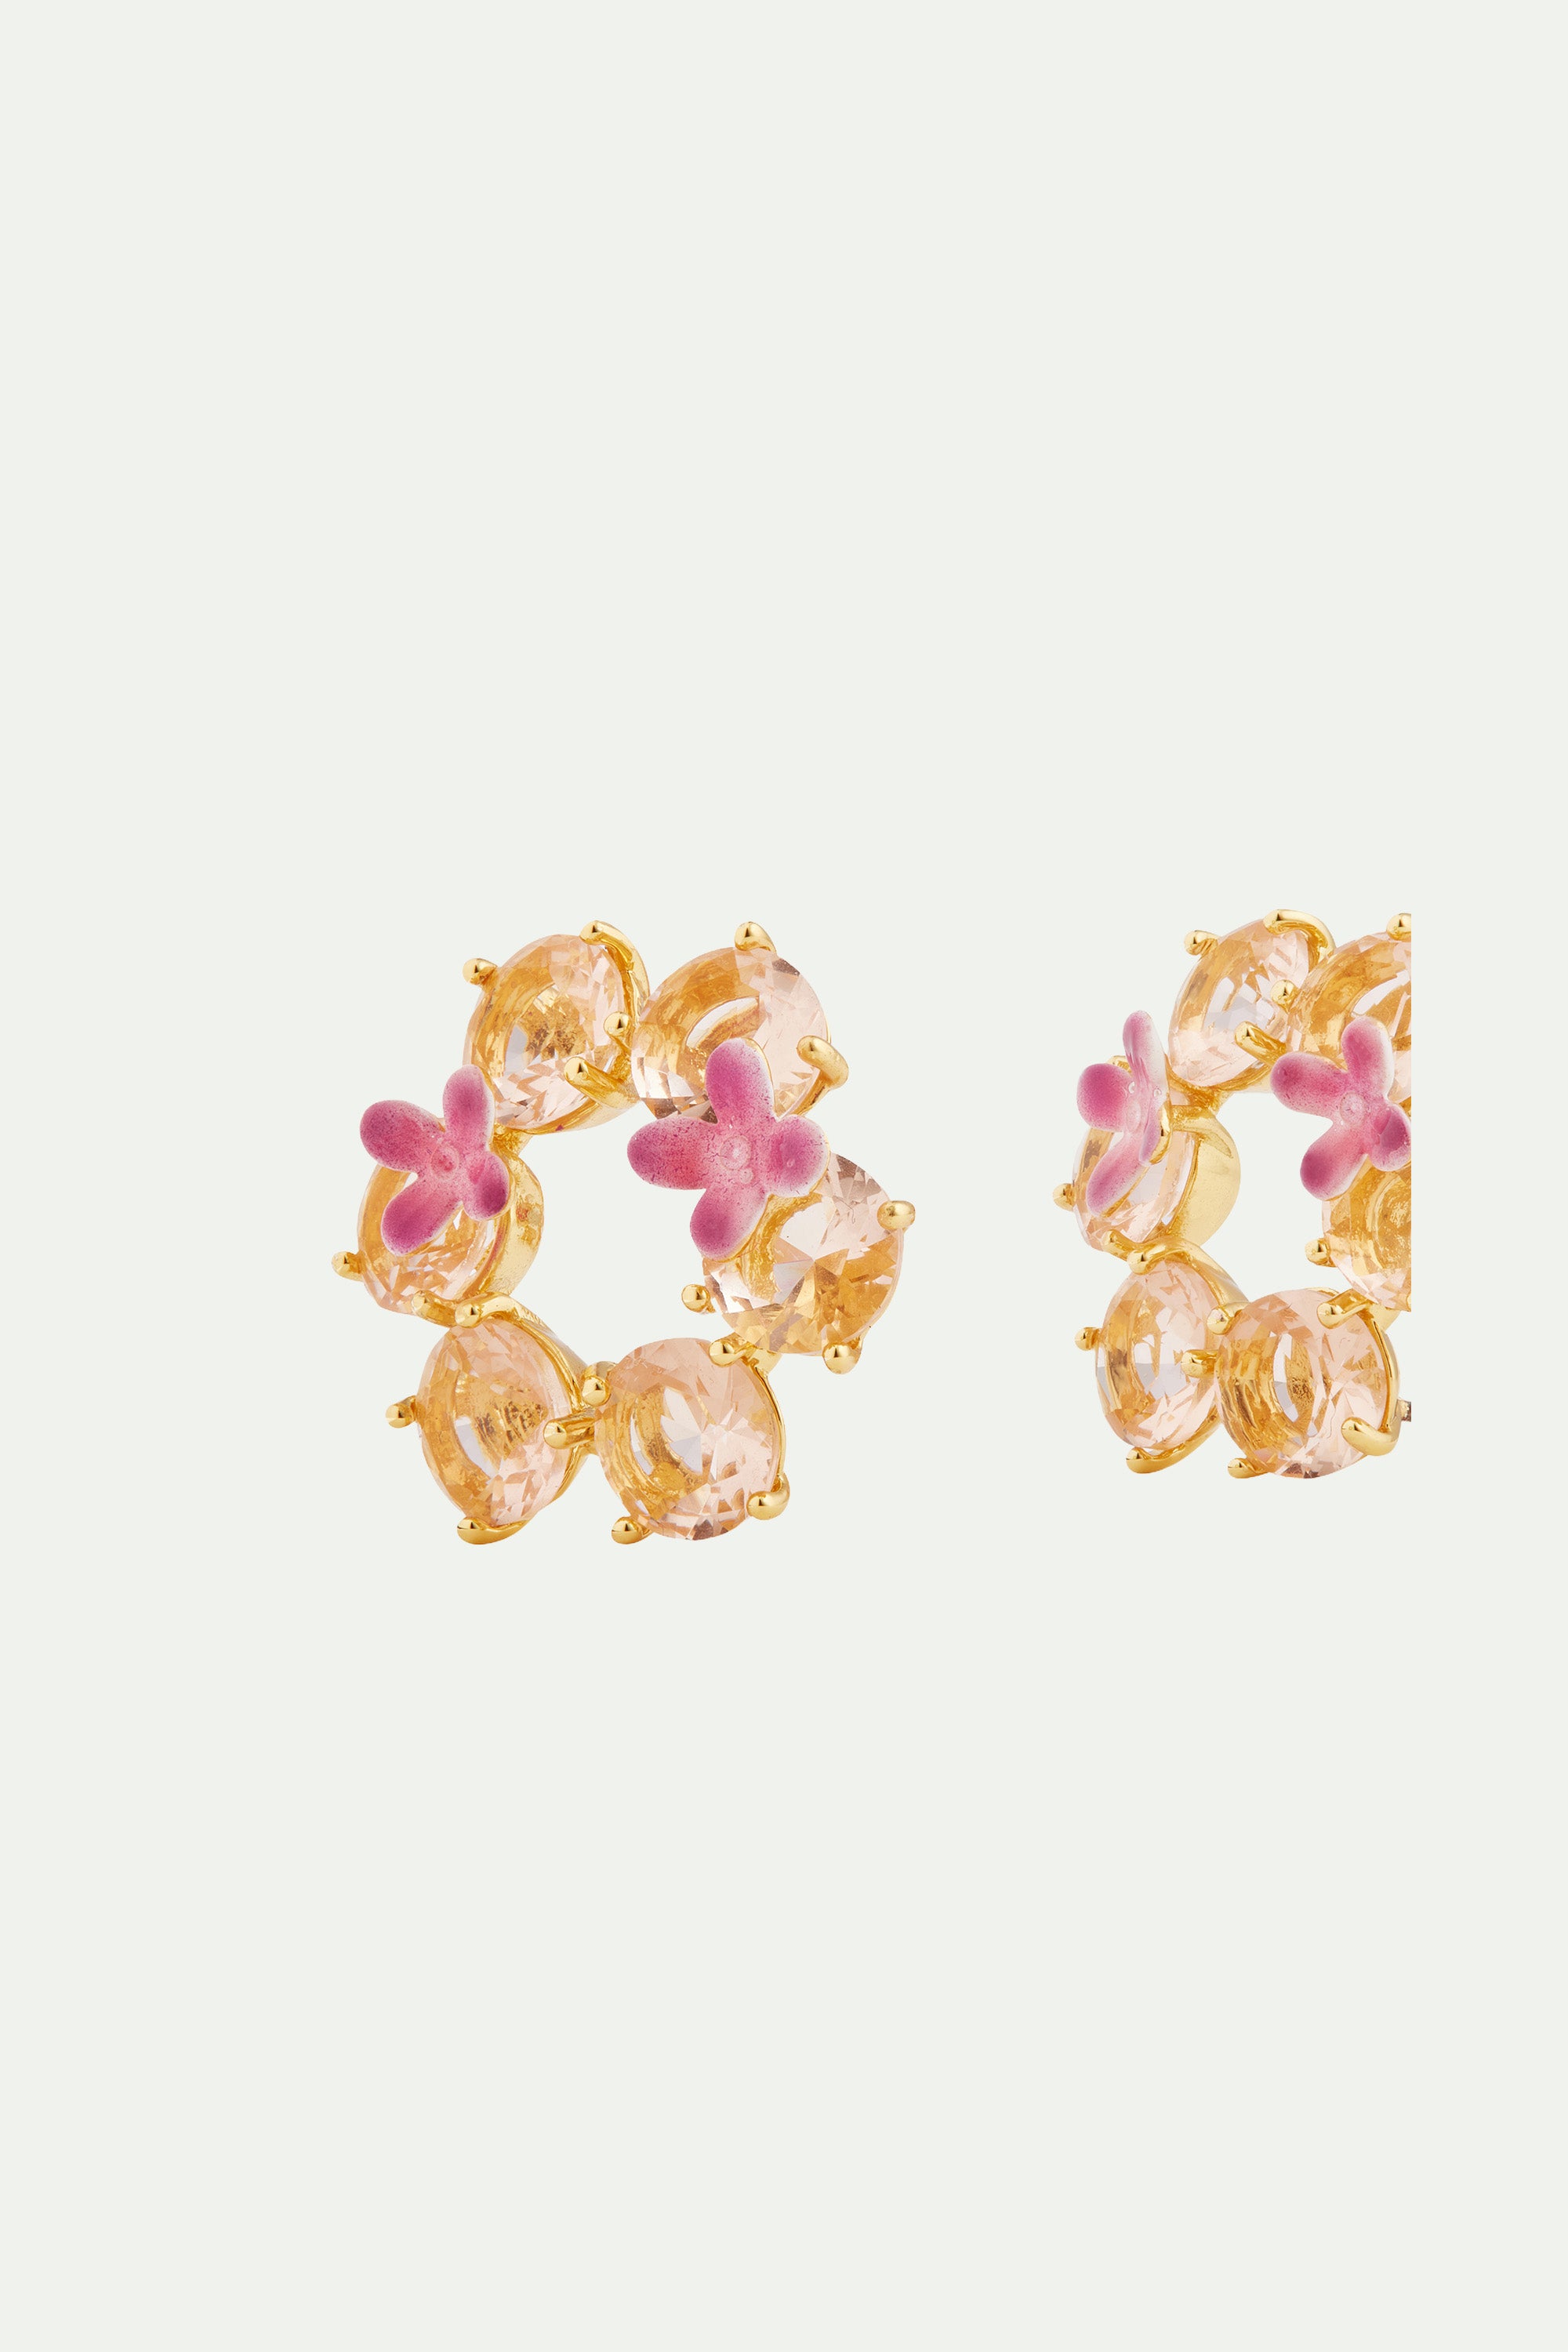 Apricot pink diamantine flower and 6 round stone post earrings